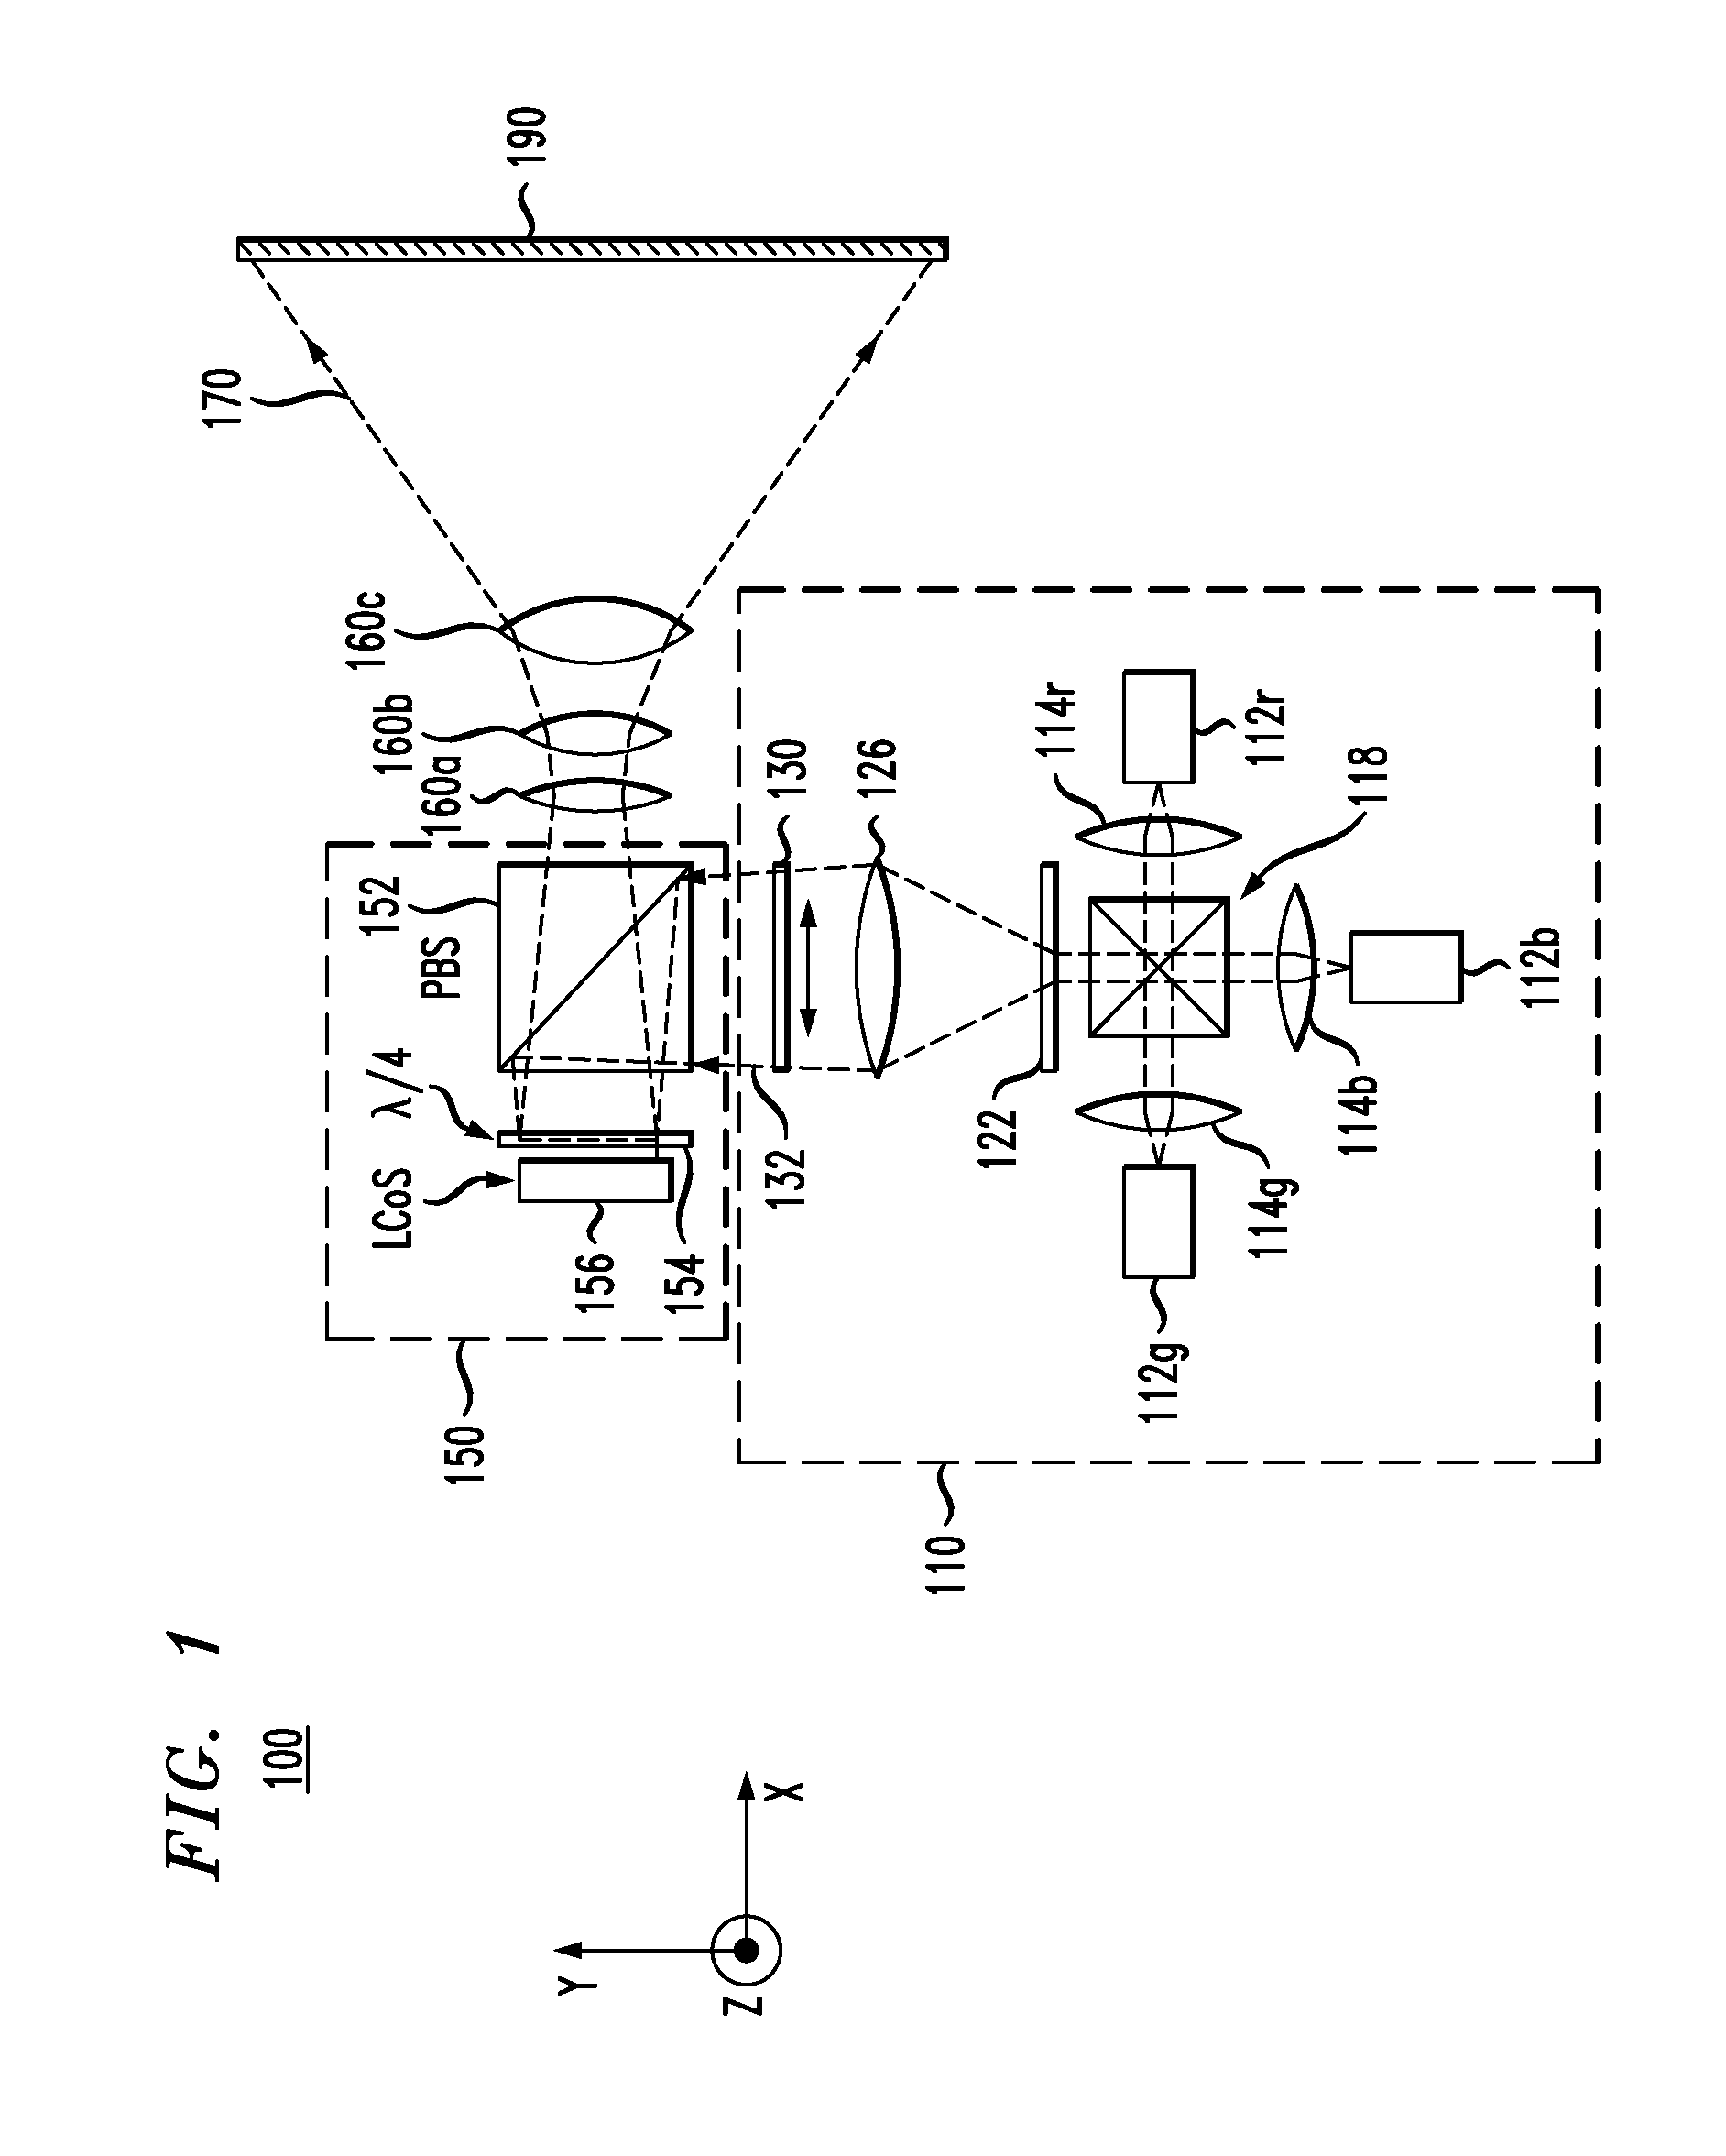 Image projector employing a speckle-reducing laser source